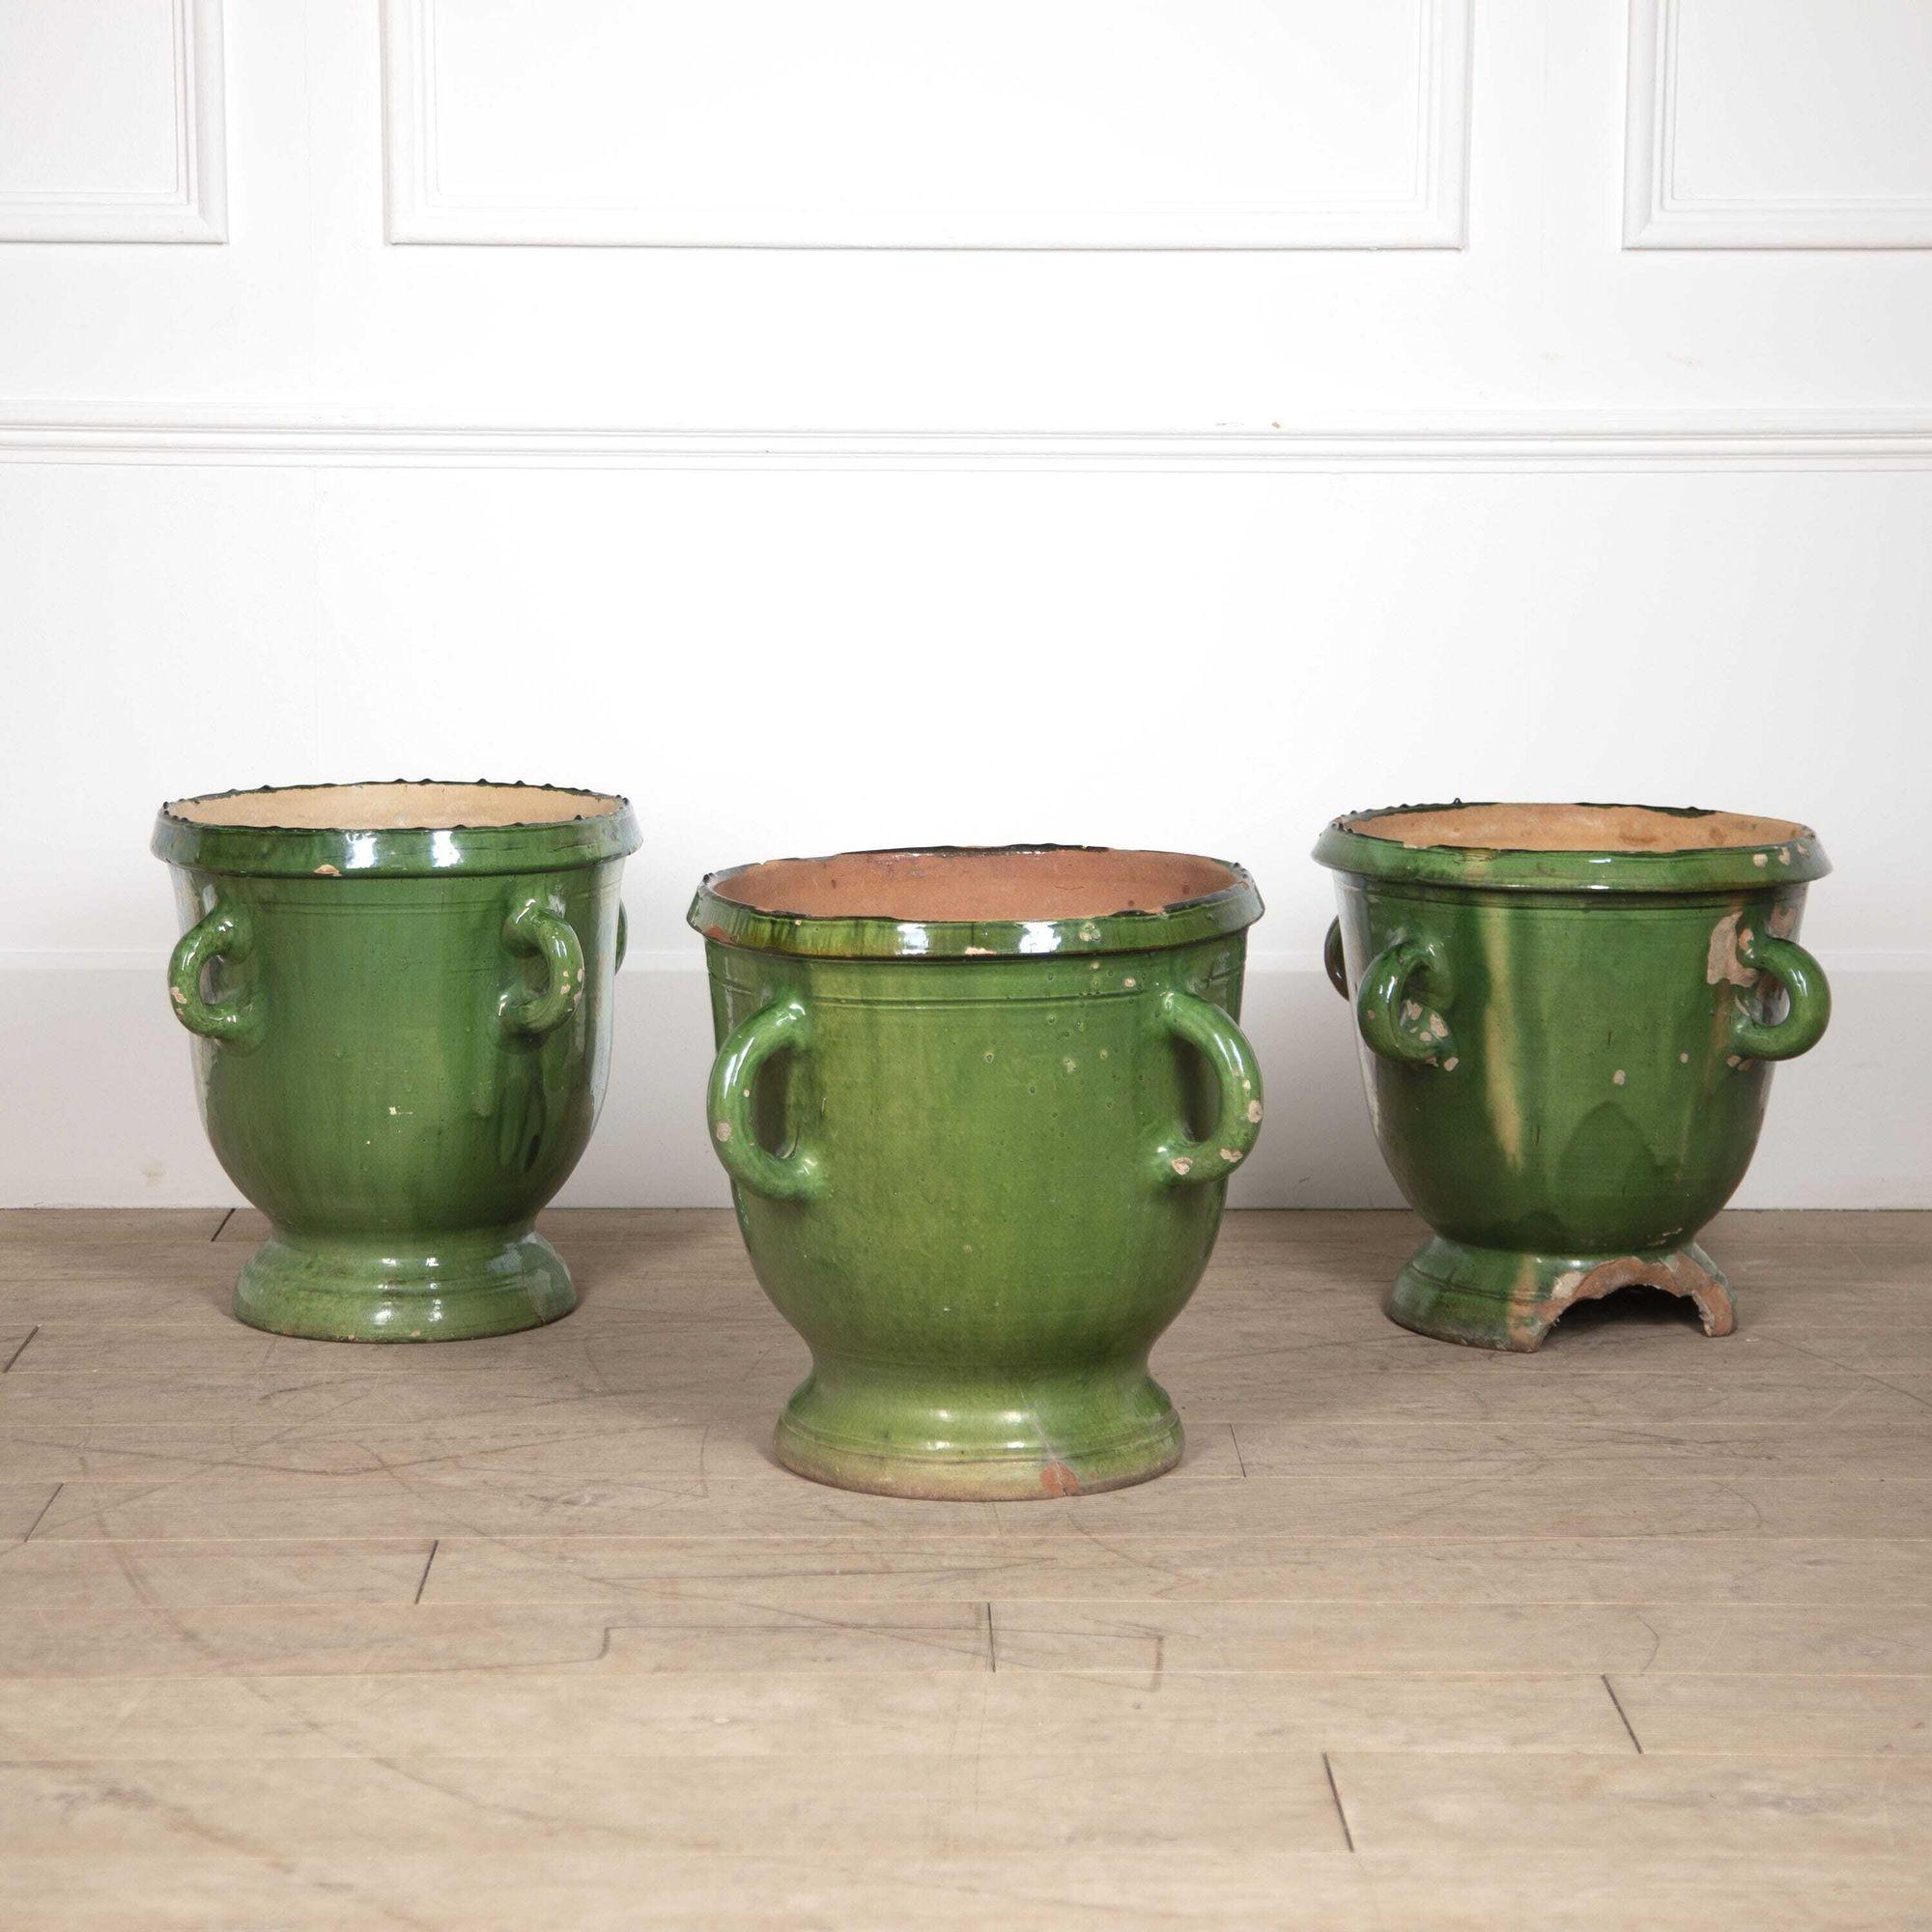 Collection of three large green-glazed Castelnaudary four handled planters.
These pots have come from a private garden in Apt and would have originally graced each side of an entrance to a beautiful home. 
All three date to the 18th to 19th